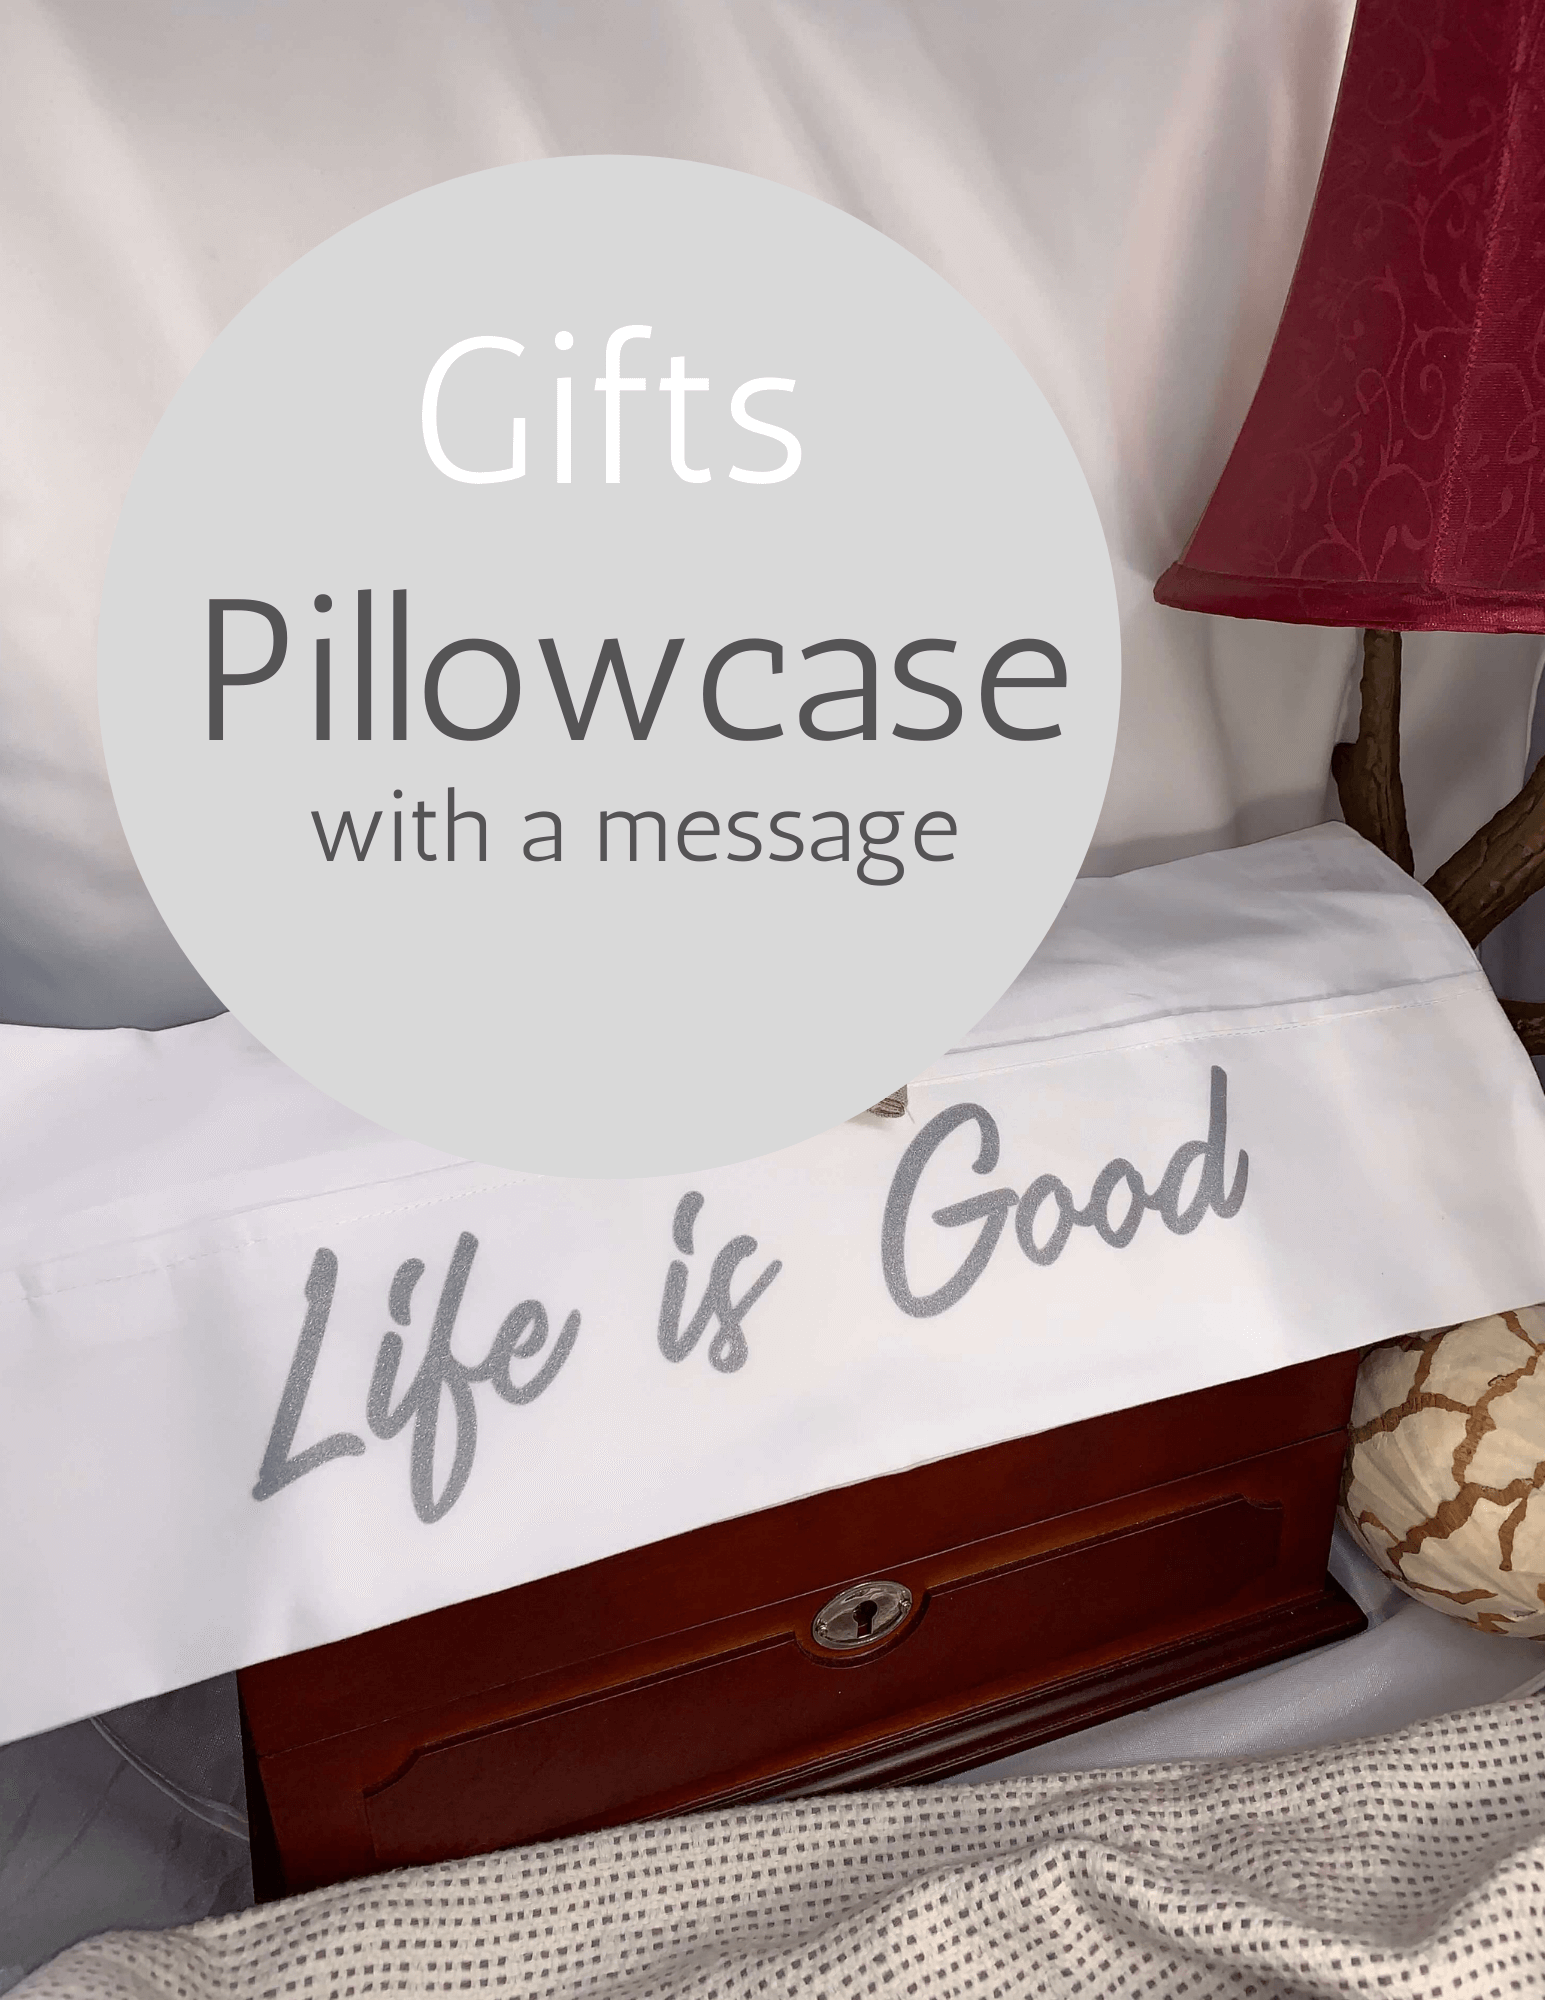 Life is Good - Pillowcase with a Message